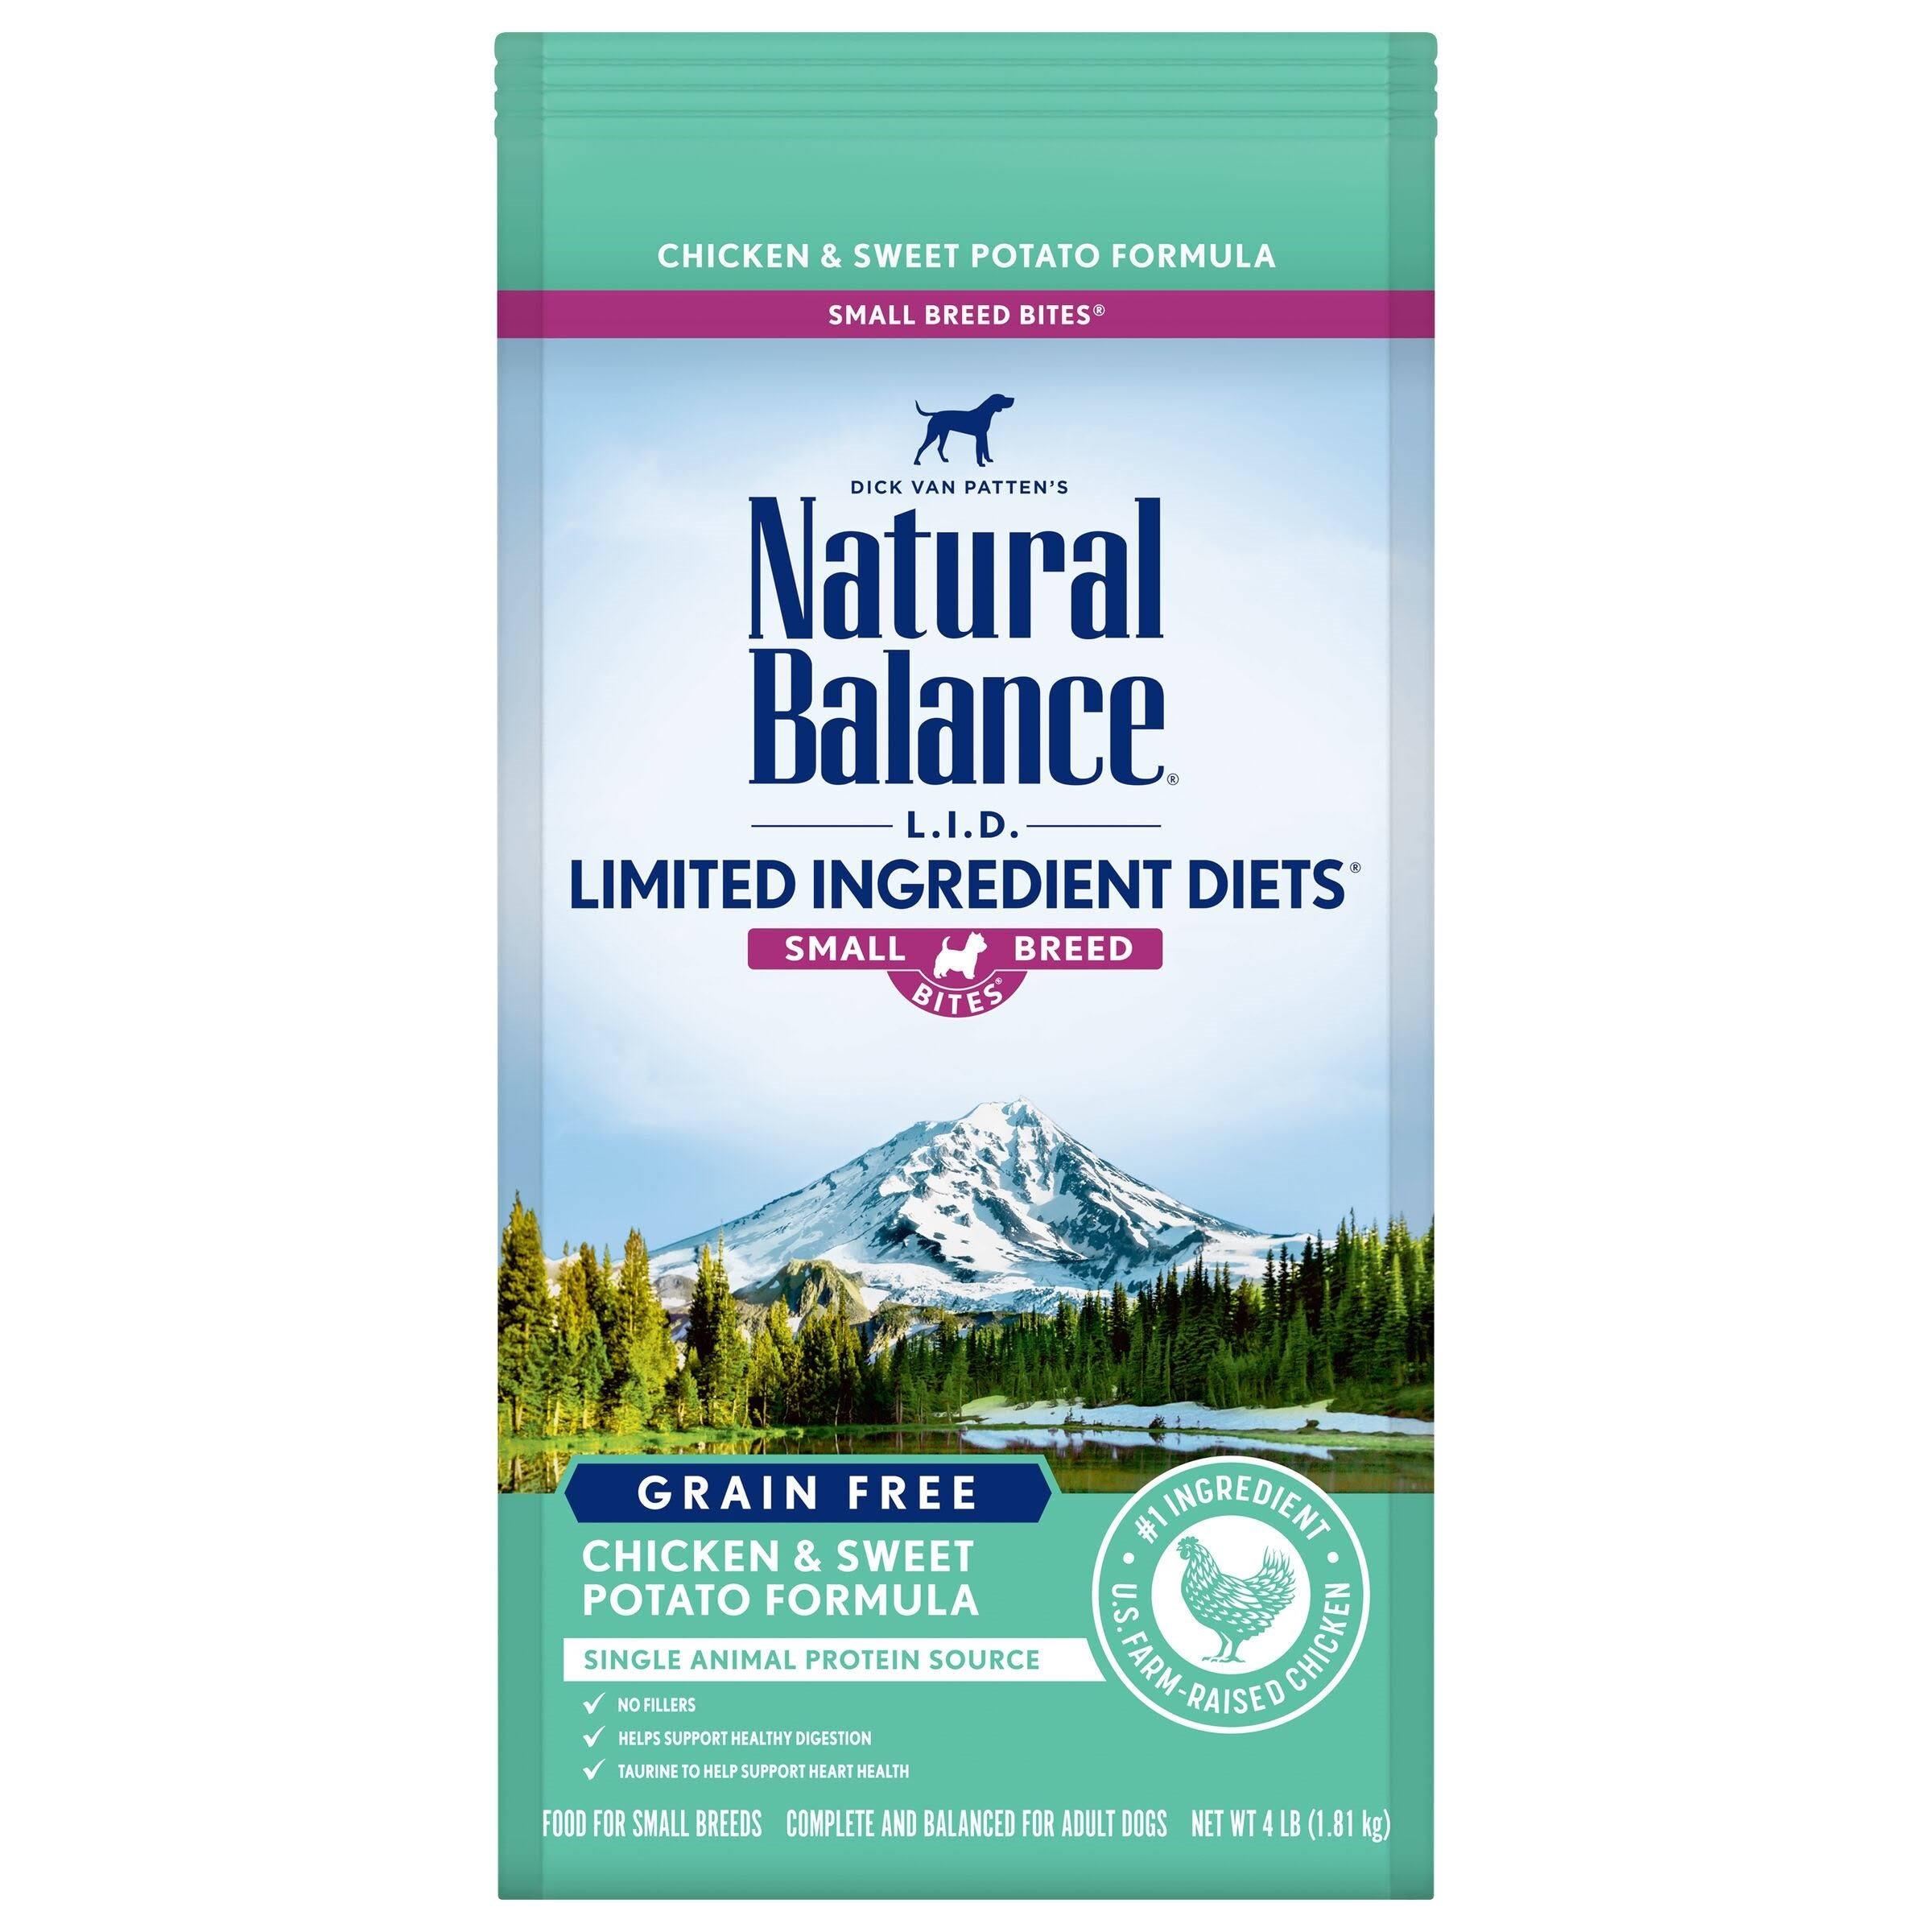 Natural Balance Limited Ingredients Diets Small Breed Bites Dog Food, Grain Free, Chicken & Sweet Potato Formula - 4 lb